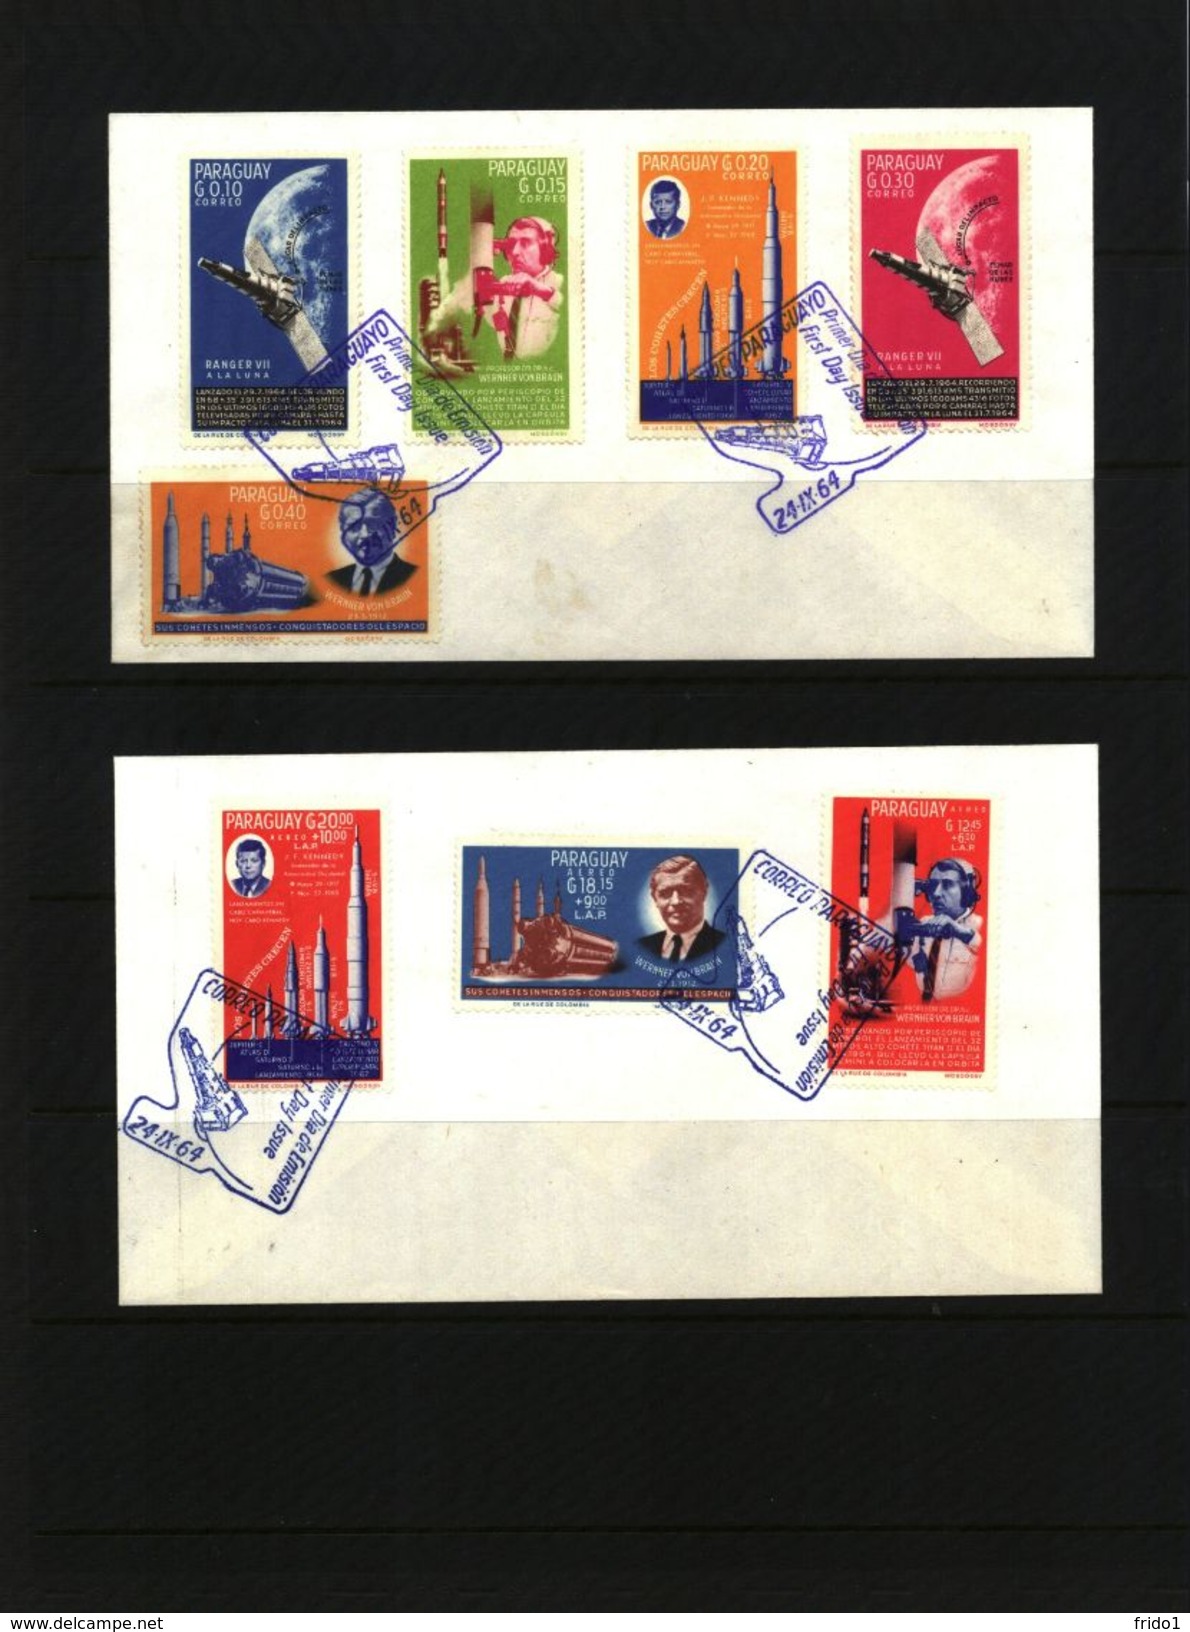 Paraguay Interesting Space / Raumfahrt  Perforated Set FDC - Sud America